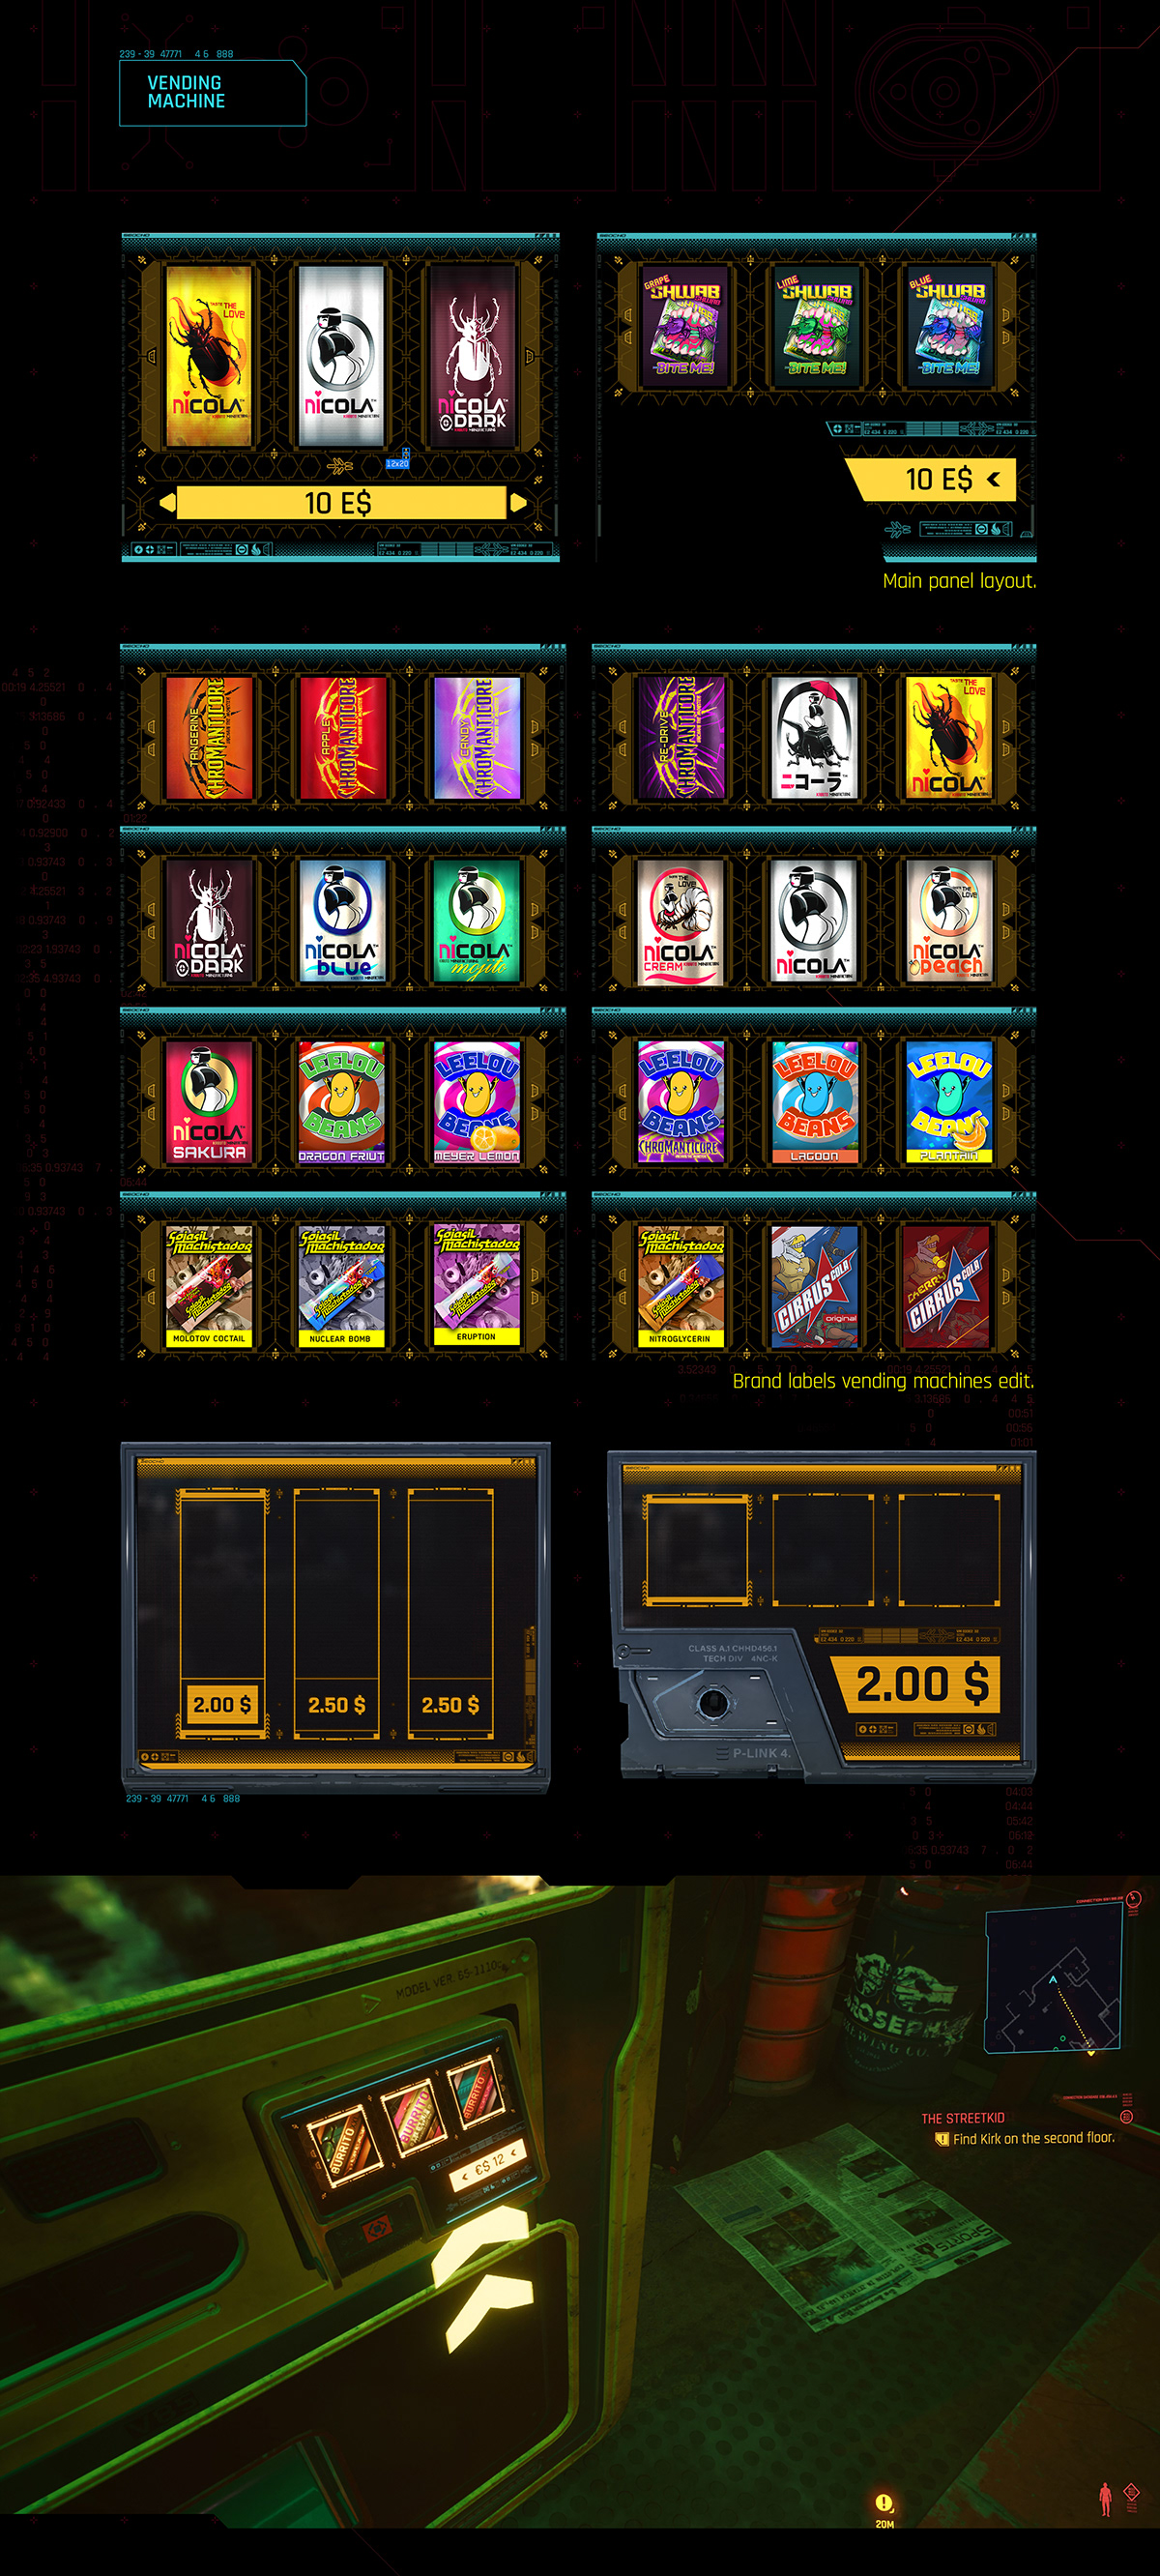 CdP CDProjektRed Cyberpunk cyberpunk 2077 Cyberpunk art Game Art UI UIART uigame ux